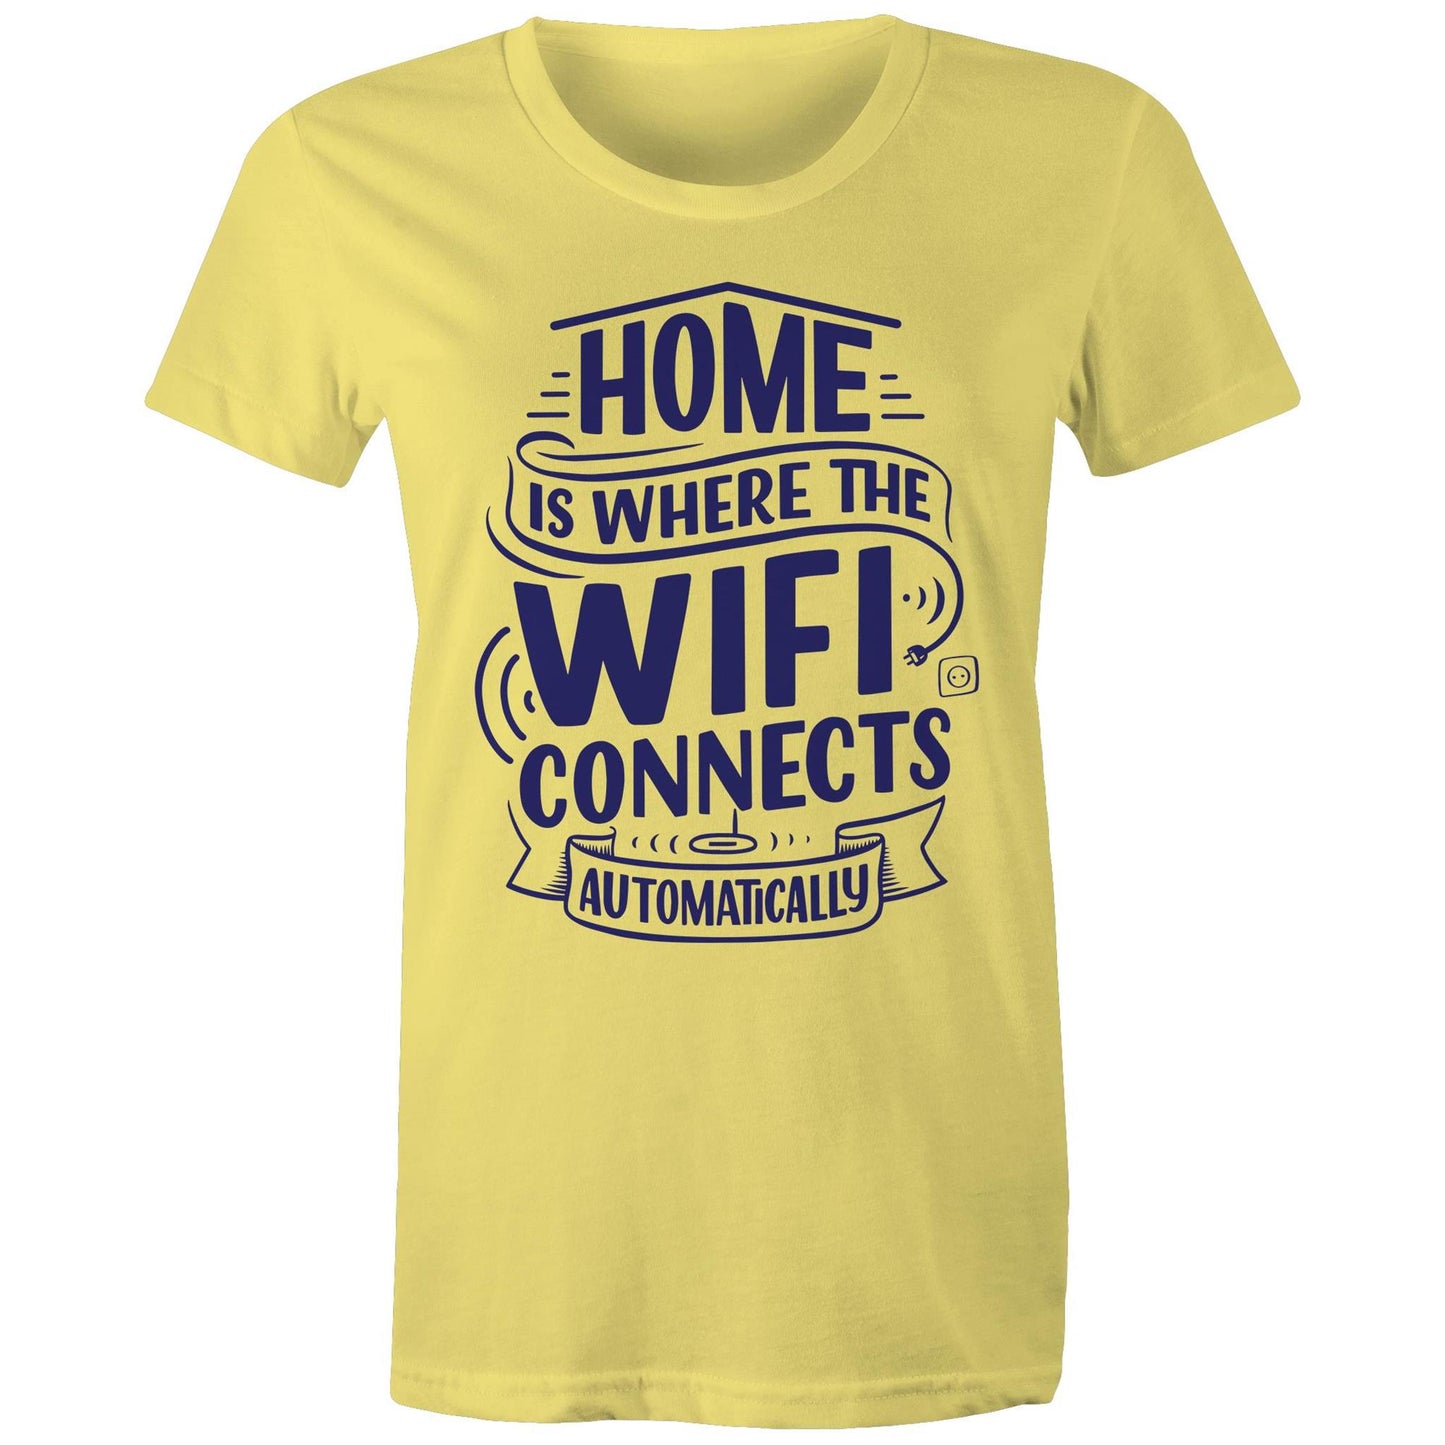 Home Is Where The WIFI Connects Automatically - Womens T-shirt Yellow Womens T-shirt Tech